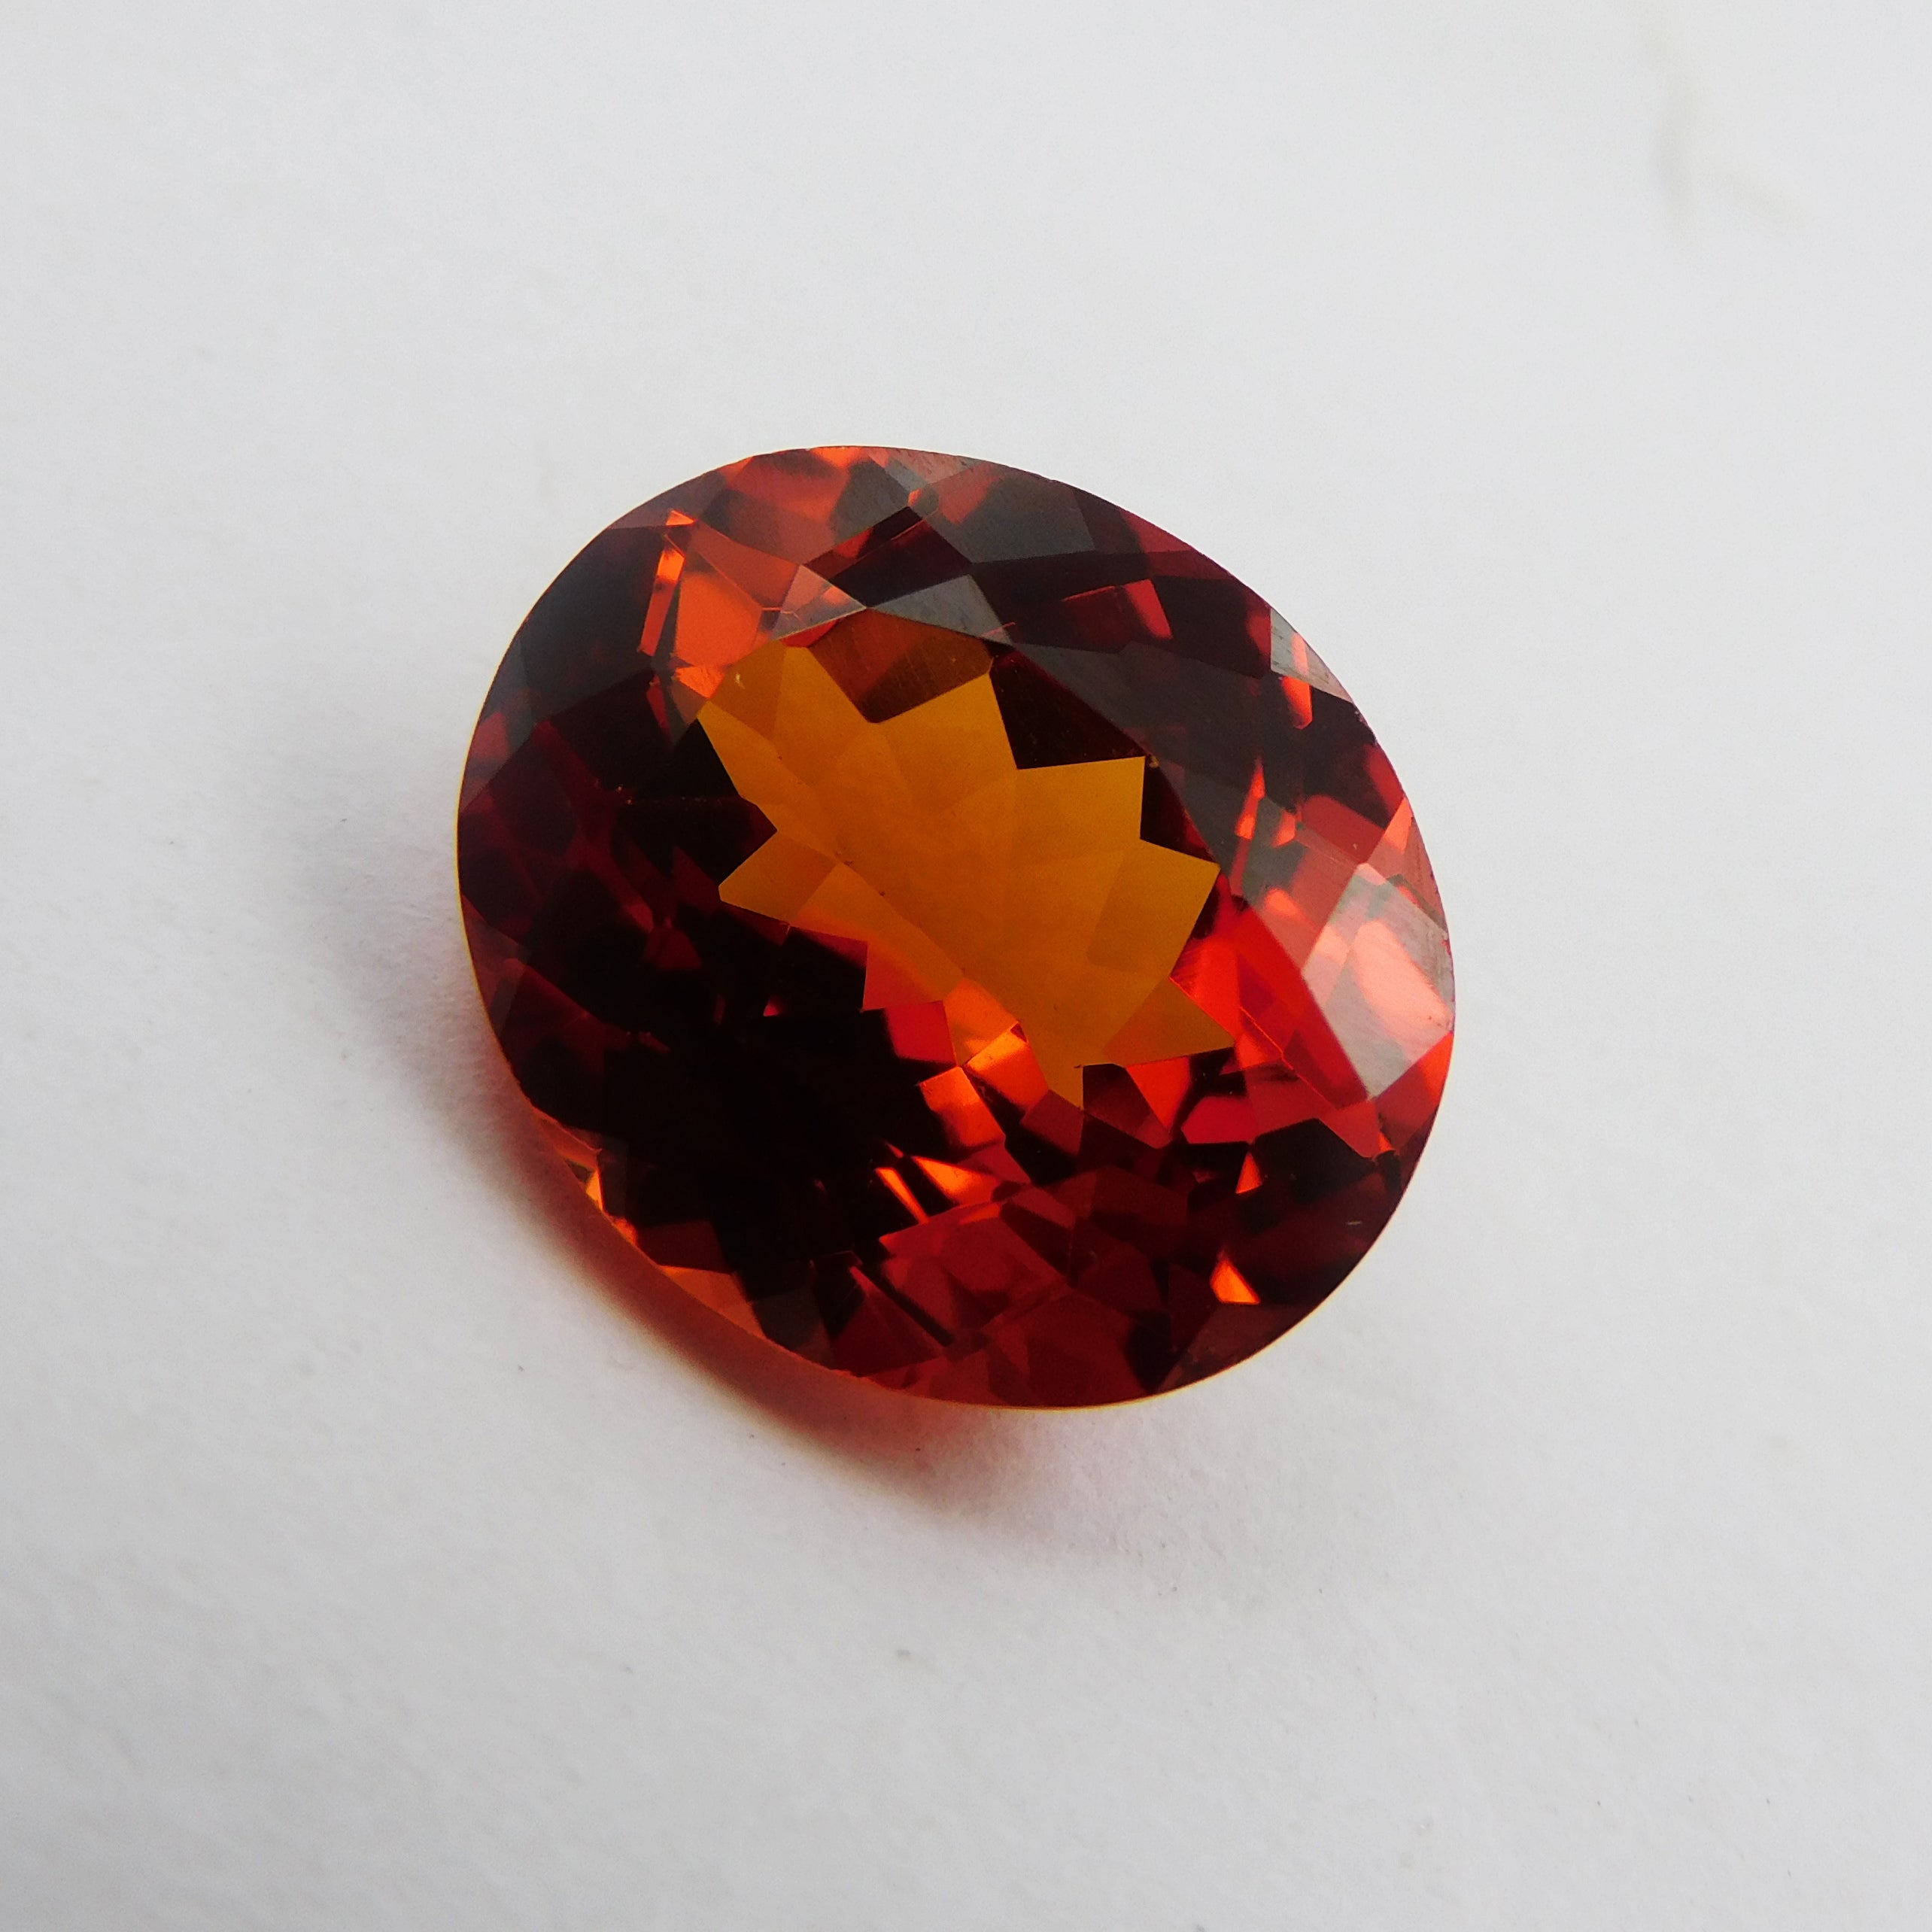 " ON SALE " 7.35 Carat Orange Sapphire Oval Shape Natural Certified Loose Gemstone | Free Shipping Free Gift | Best Offer